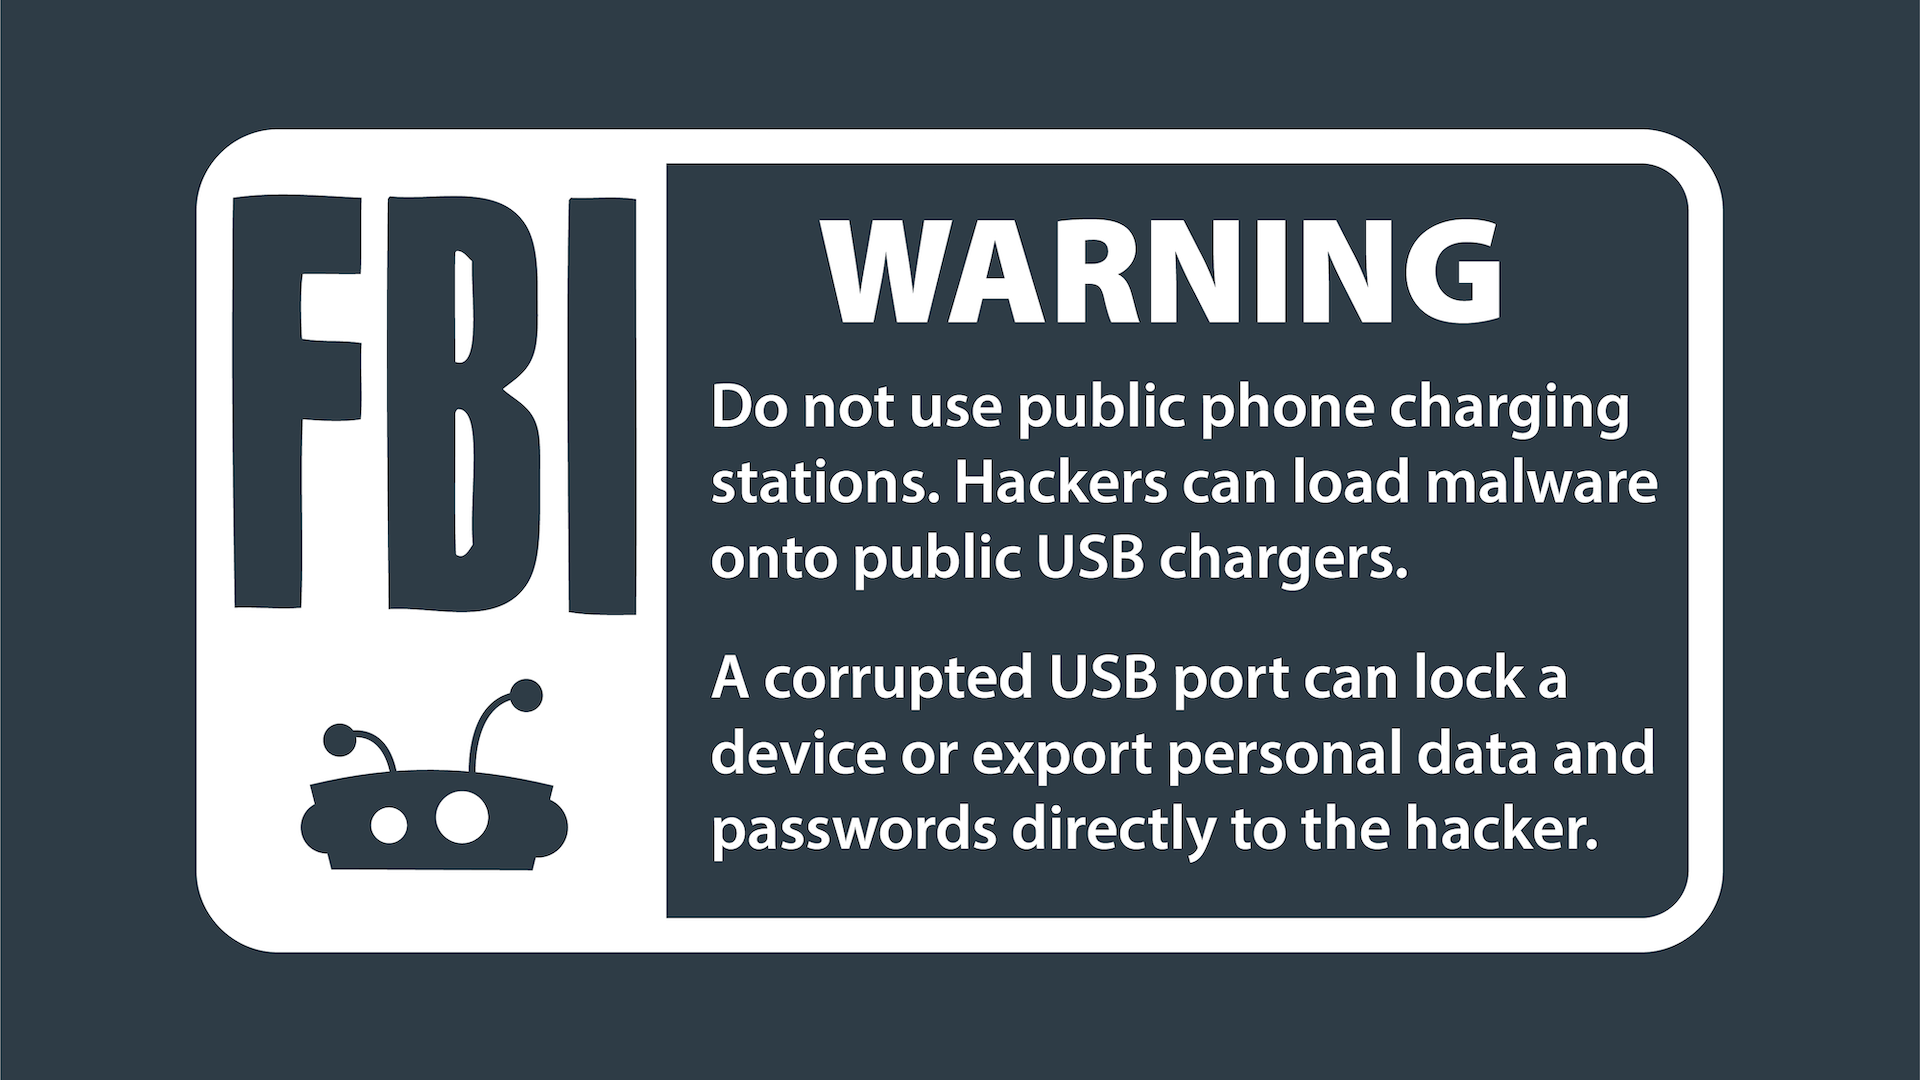 FBI warning graphic used to warn the public about using public phone charging stations